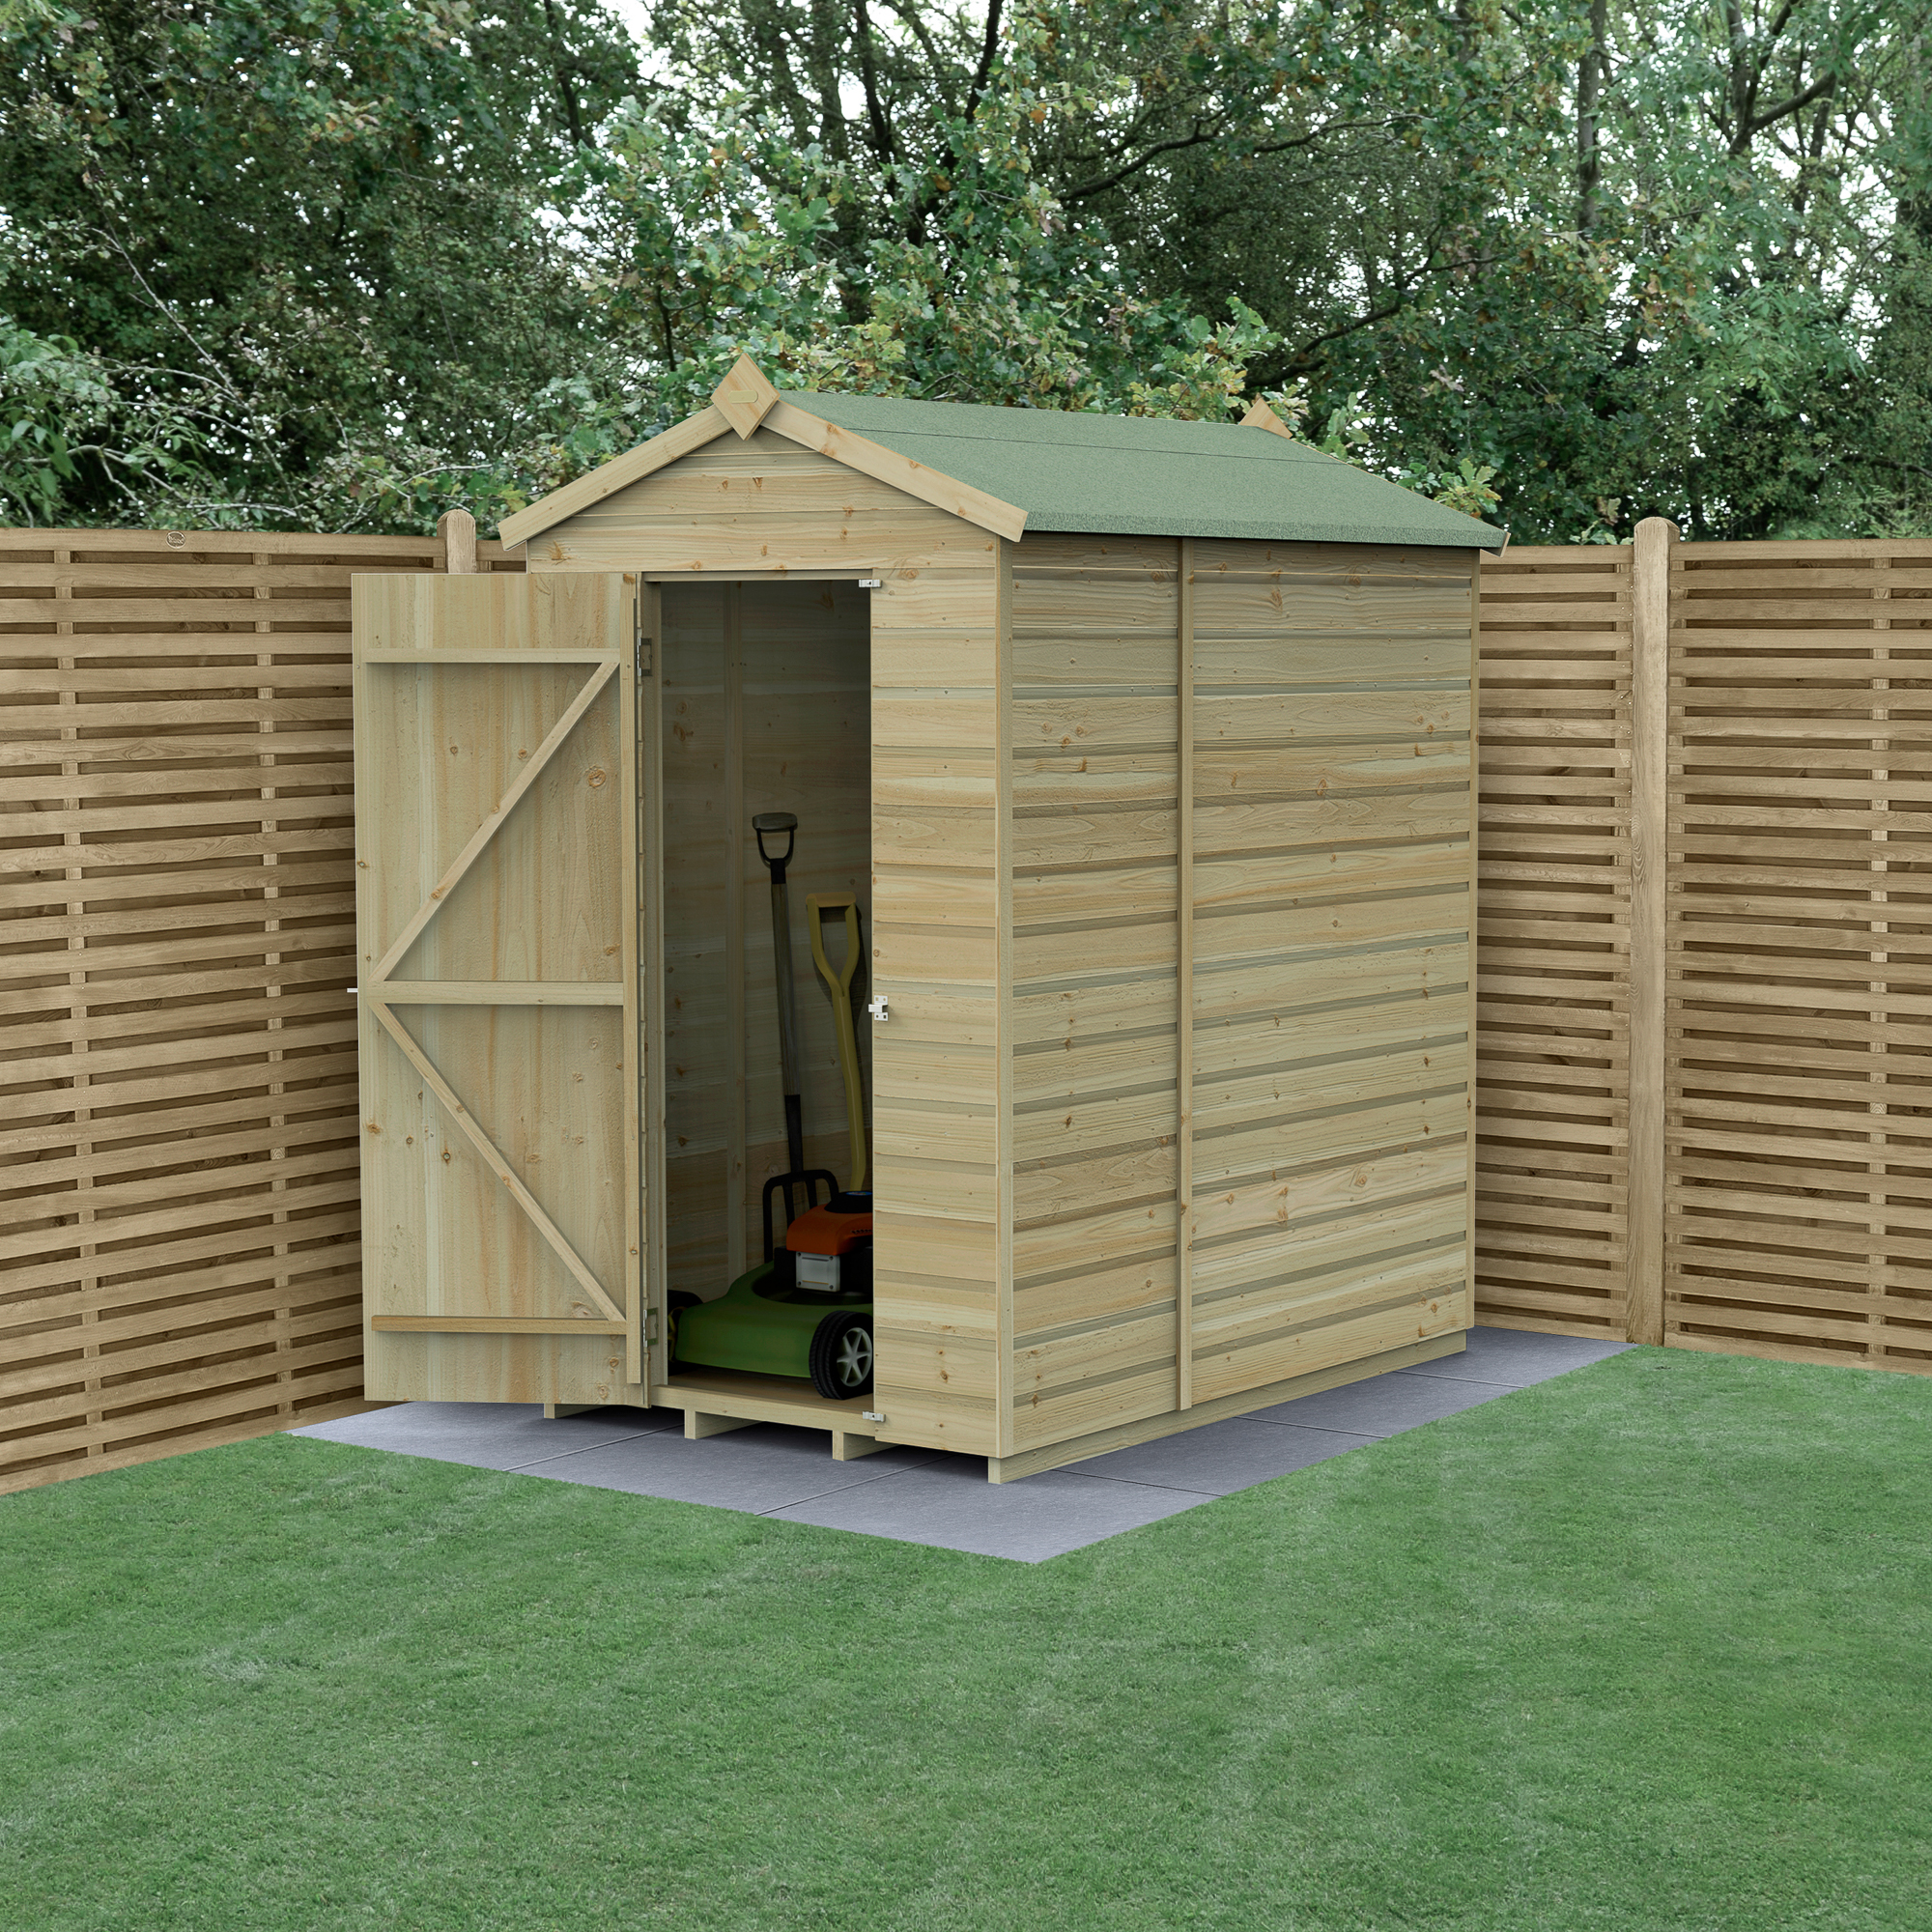 Forest Garden Beckwood 4 x 6ft Apex Shiplap Pressure Treated Windowless Shed with Base